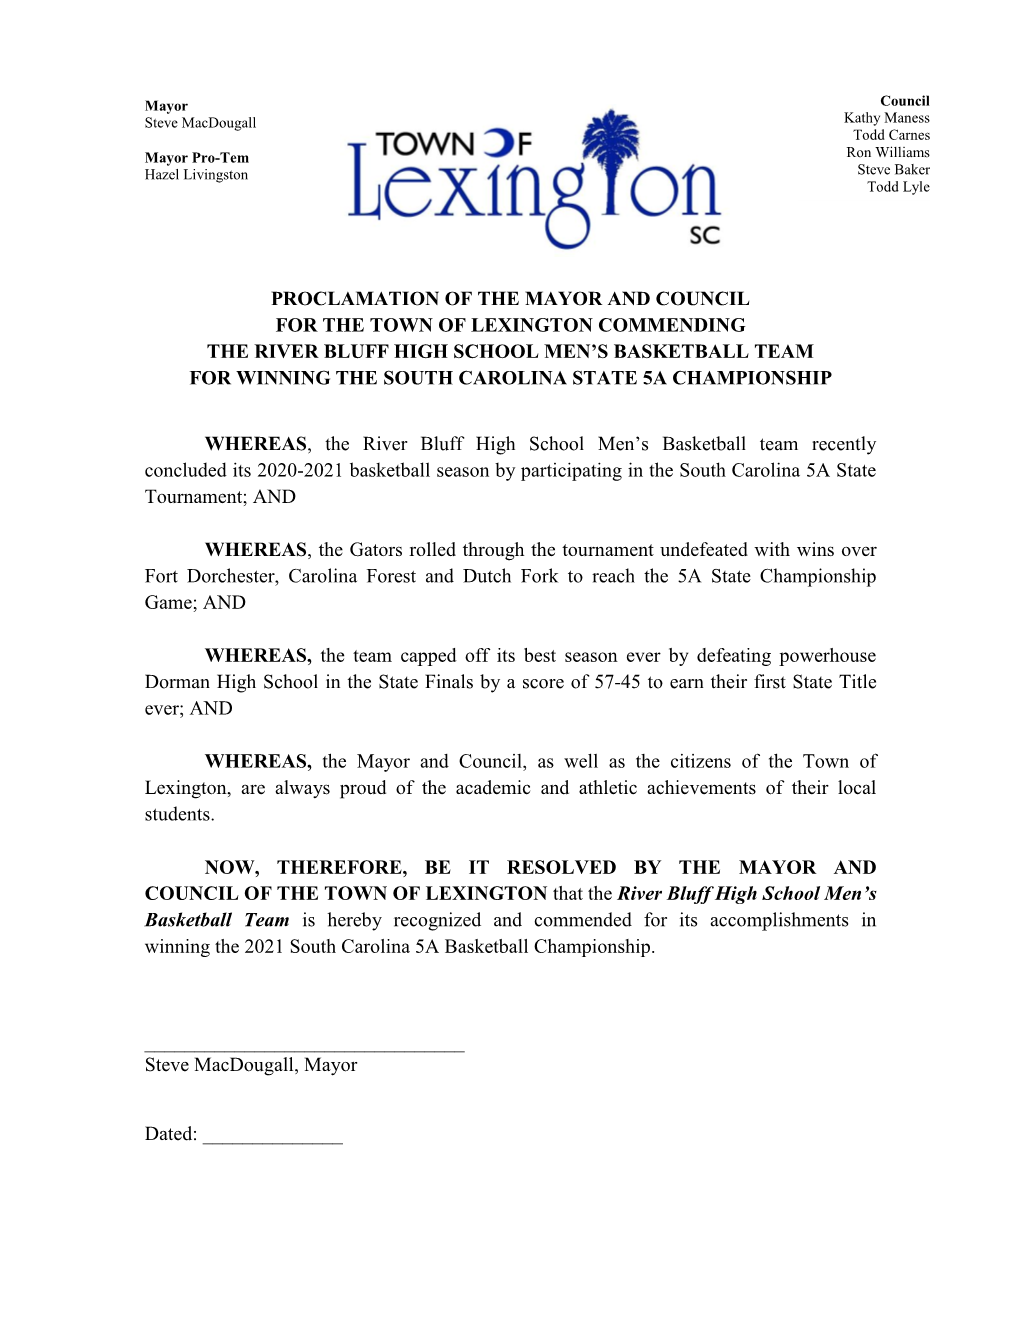 Proclamation of the Mayor and Council for the Town of Lexington Commending the River Bluff High School Men's Basketball Team